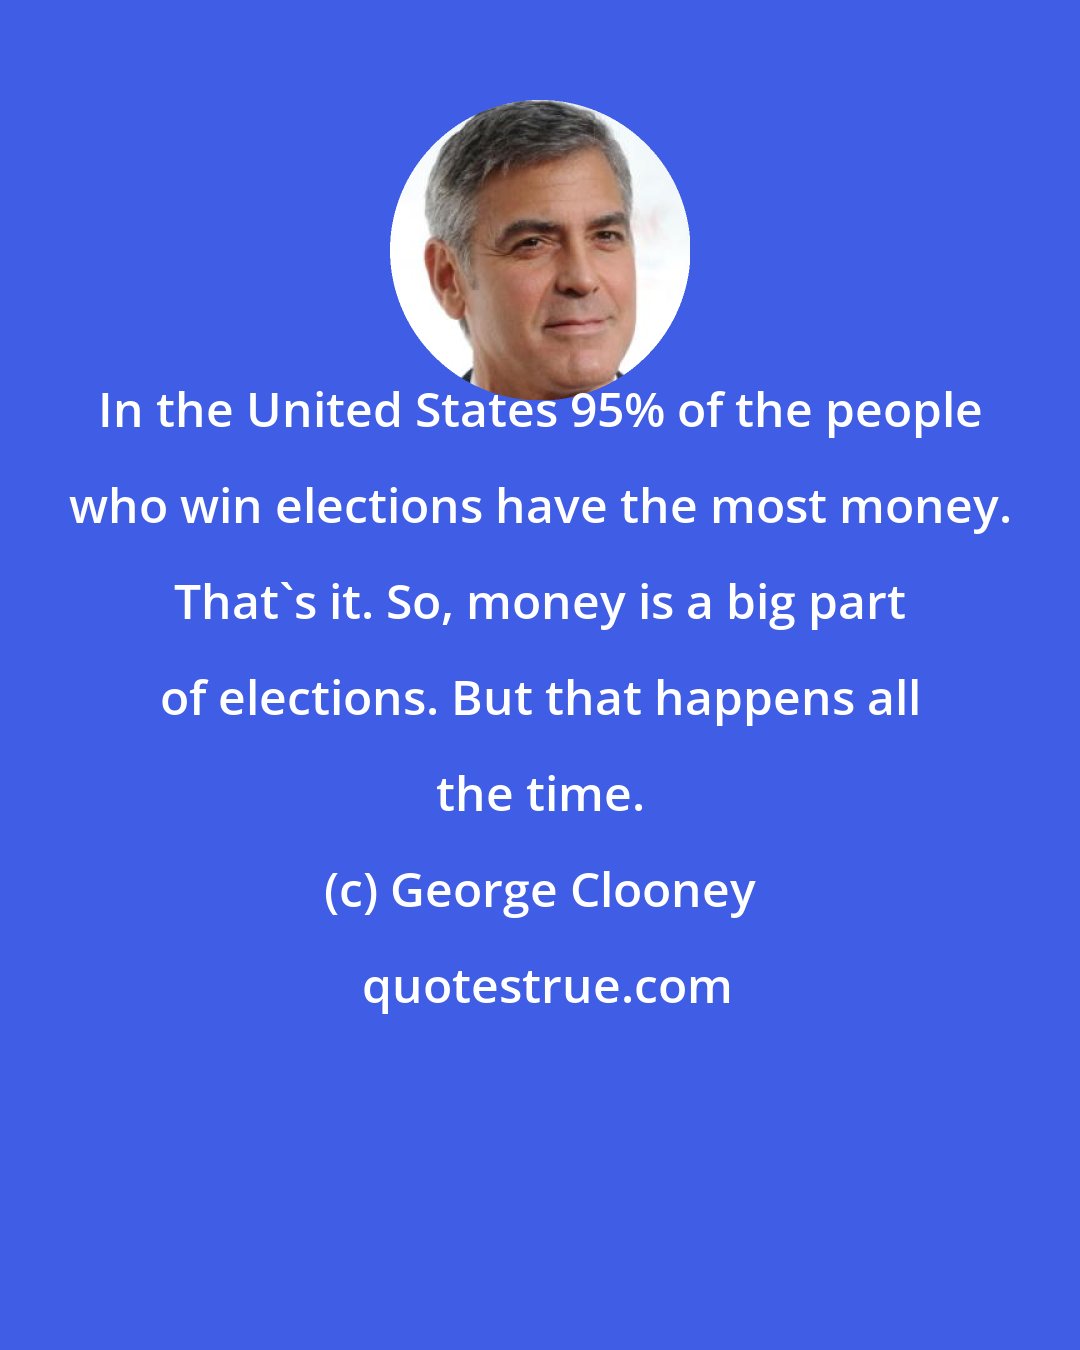 George Clooney: In the United States 95% of the people who win elections have the most money. That's it. So, money is a big part of elections. But that happens all the time.